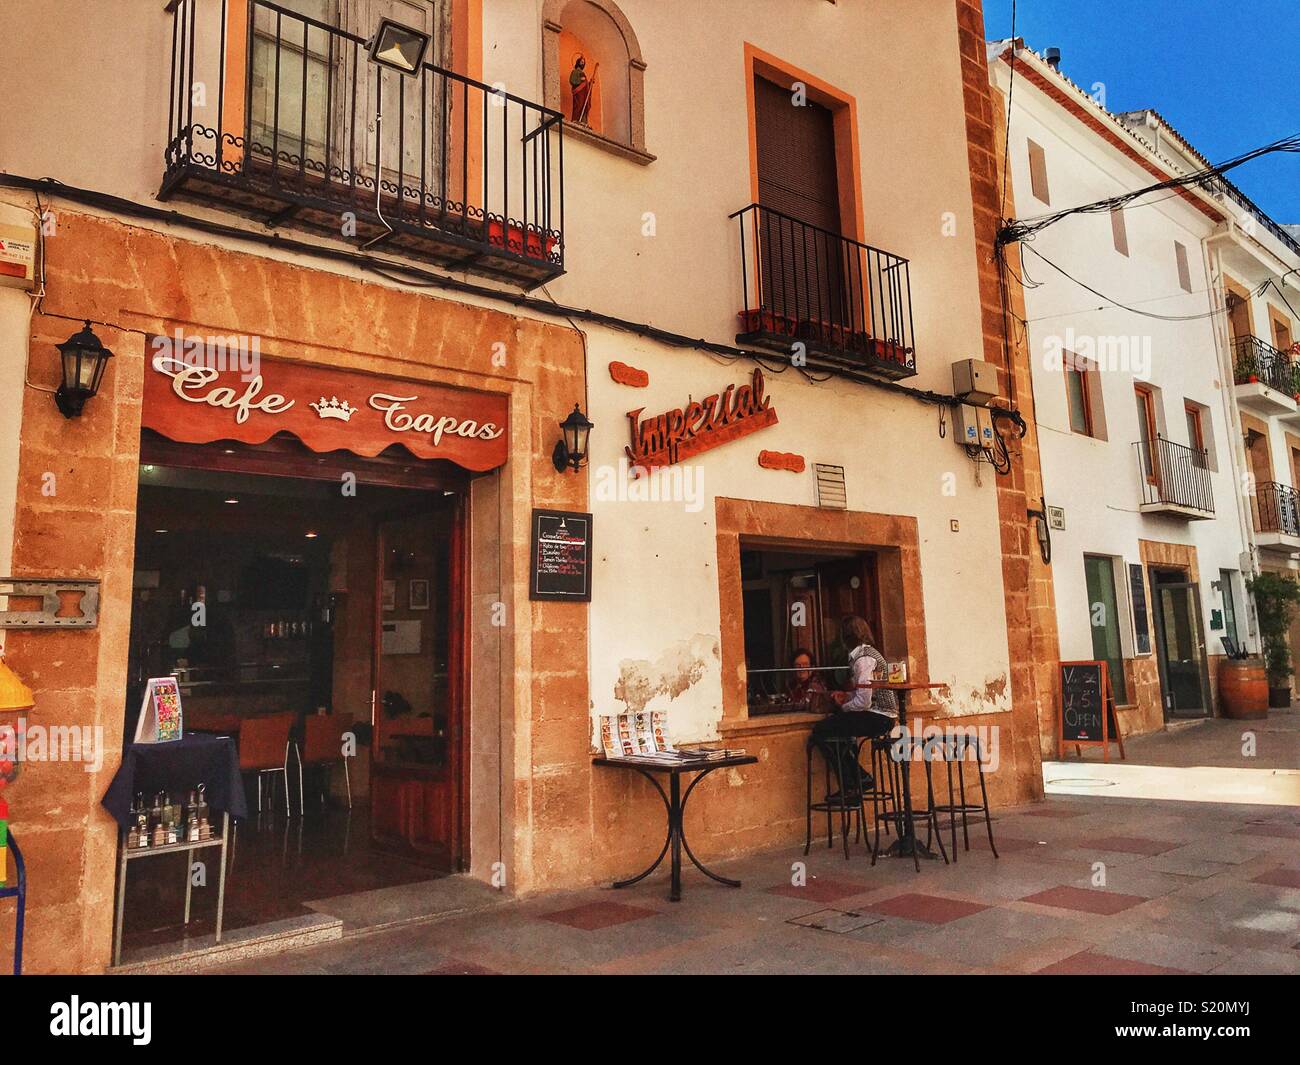 Bar imperial, traditional, typical, tapas bar in the Old Town of Javea/ Xabia, Costa Blanca, Spain Stock Photo